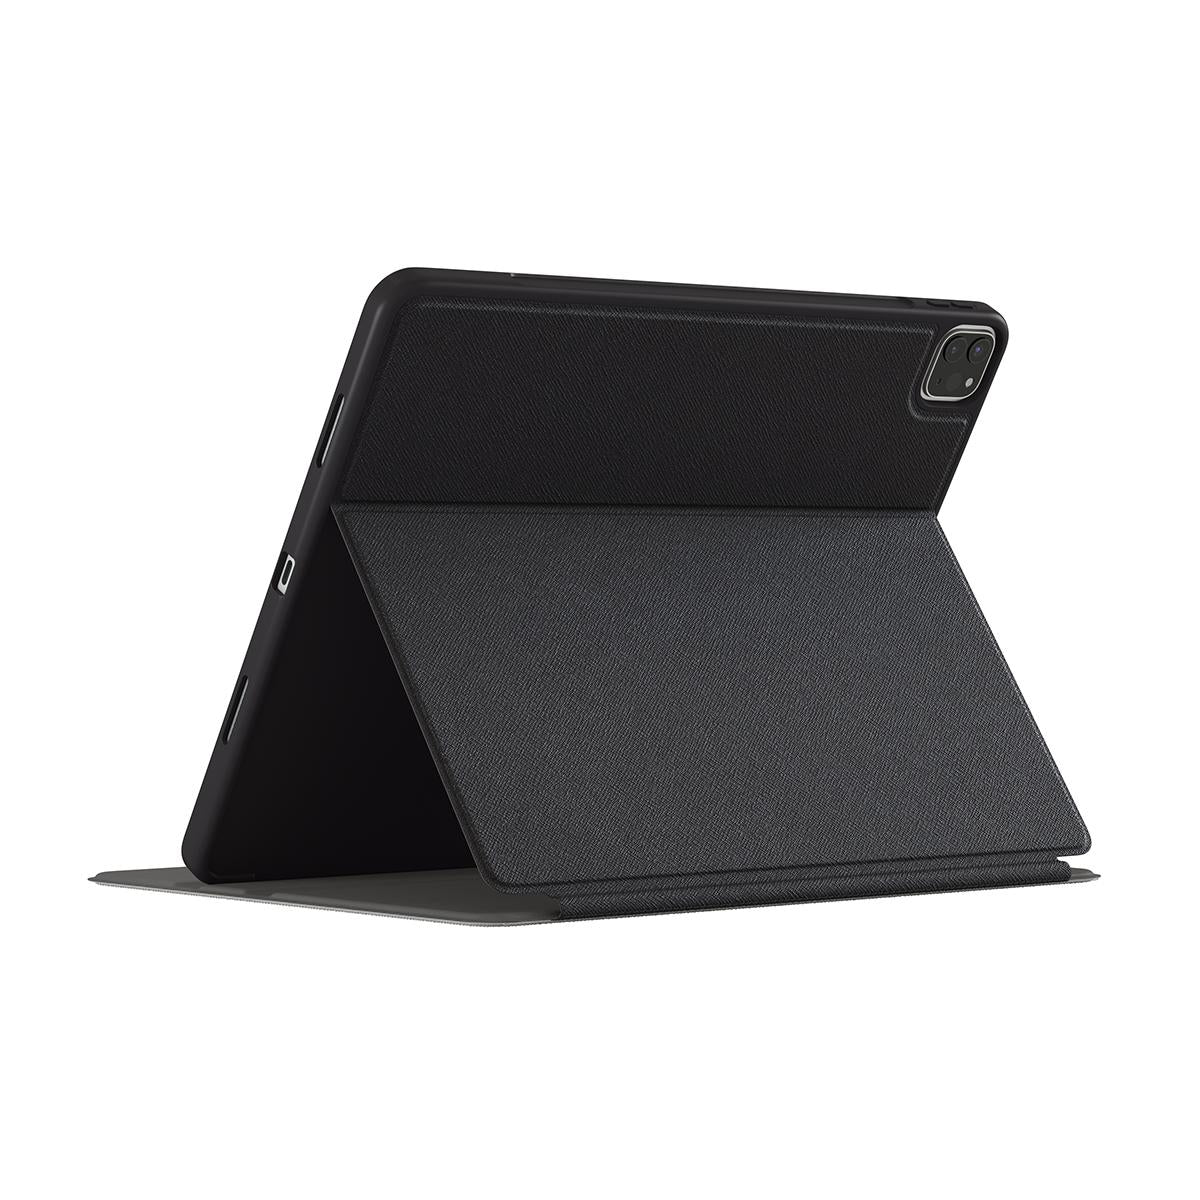 IMMERSE YOURSELF IPAD CASE